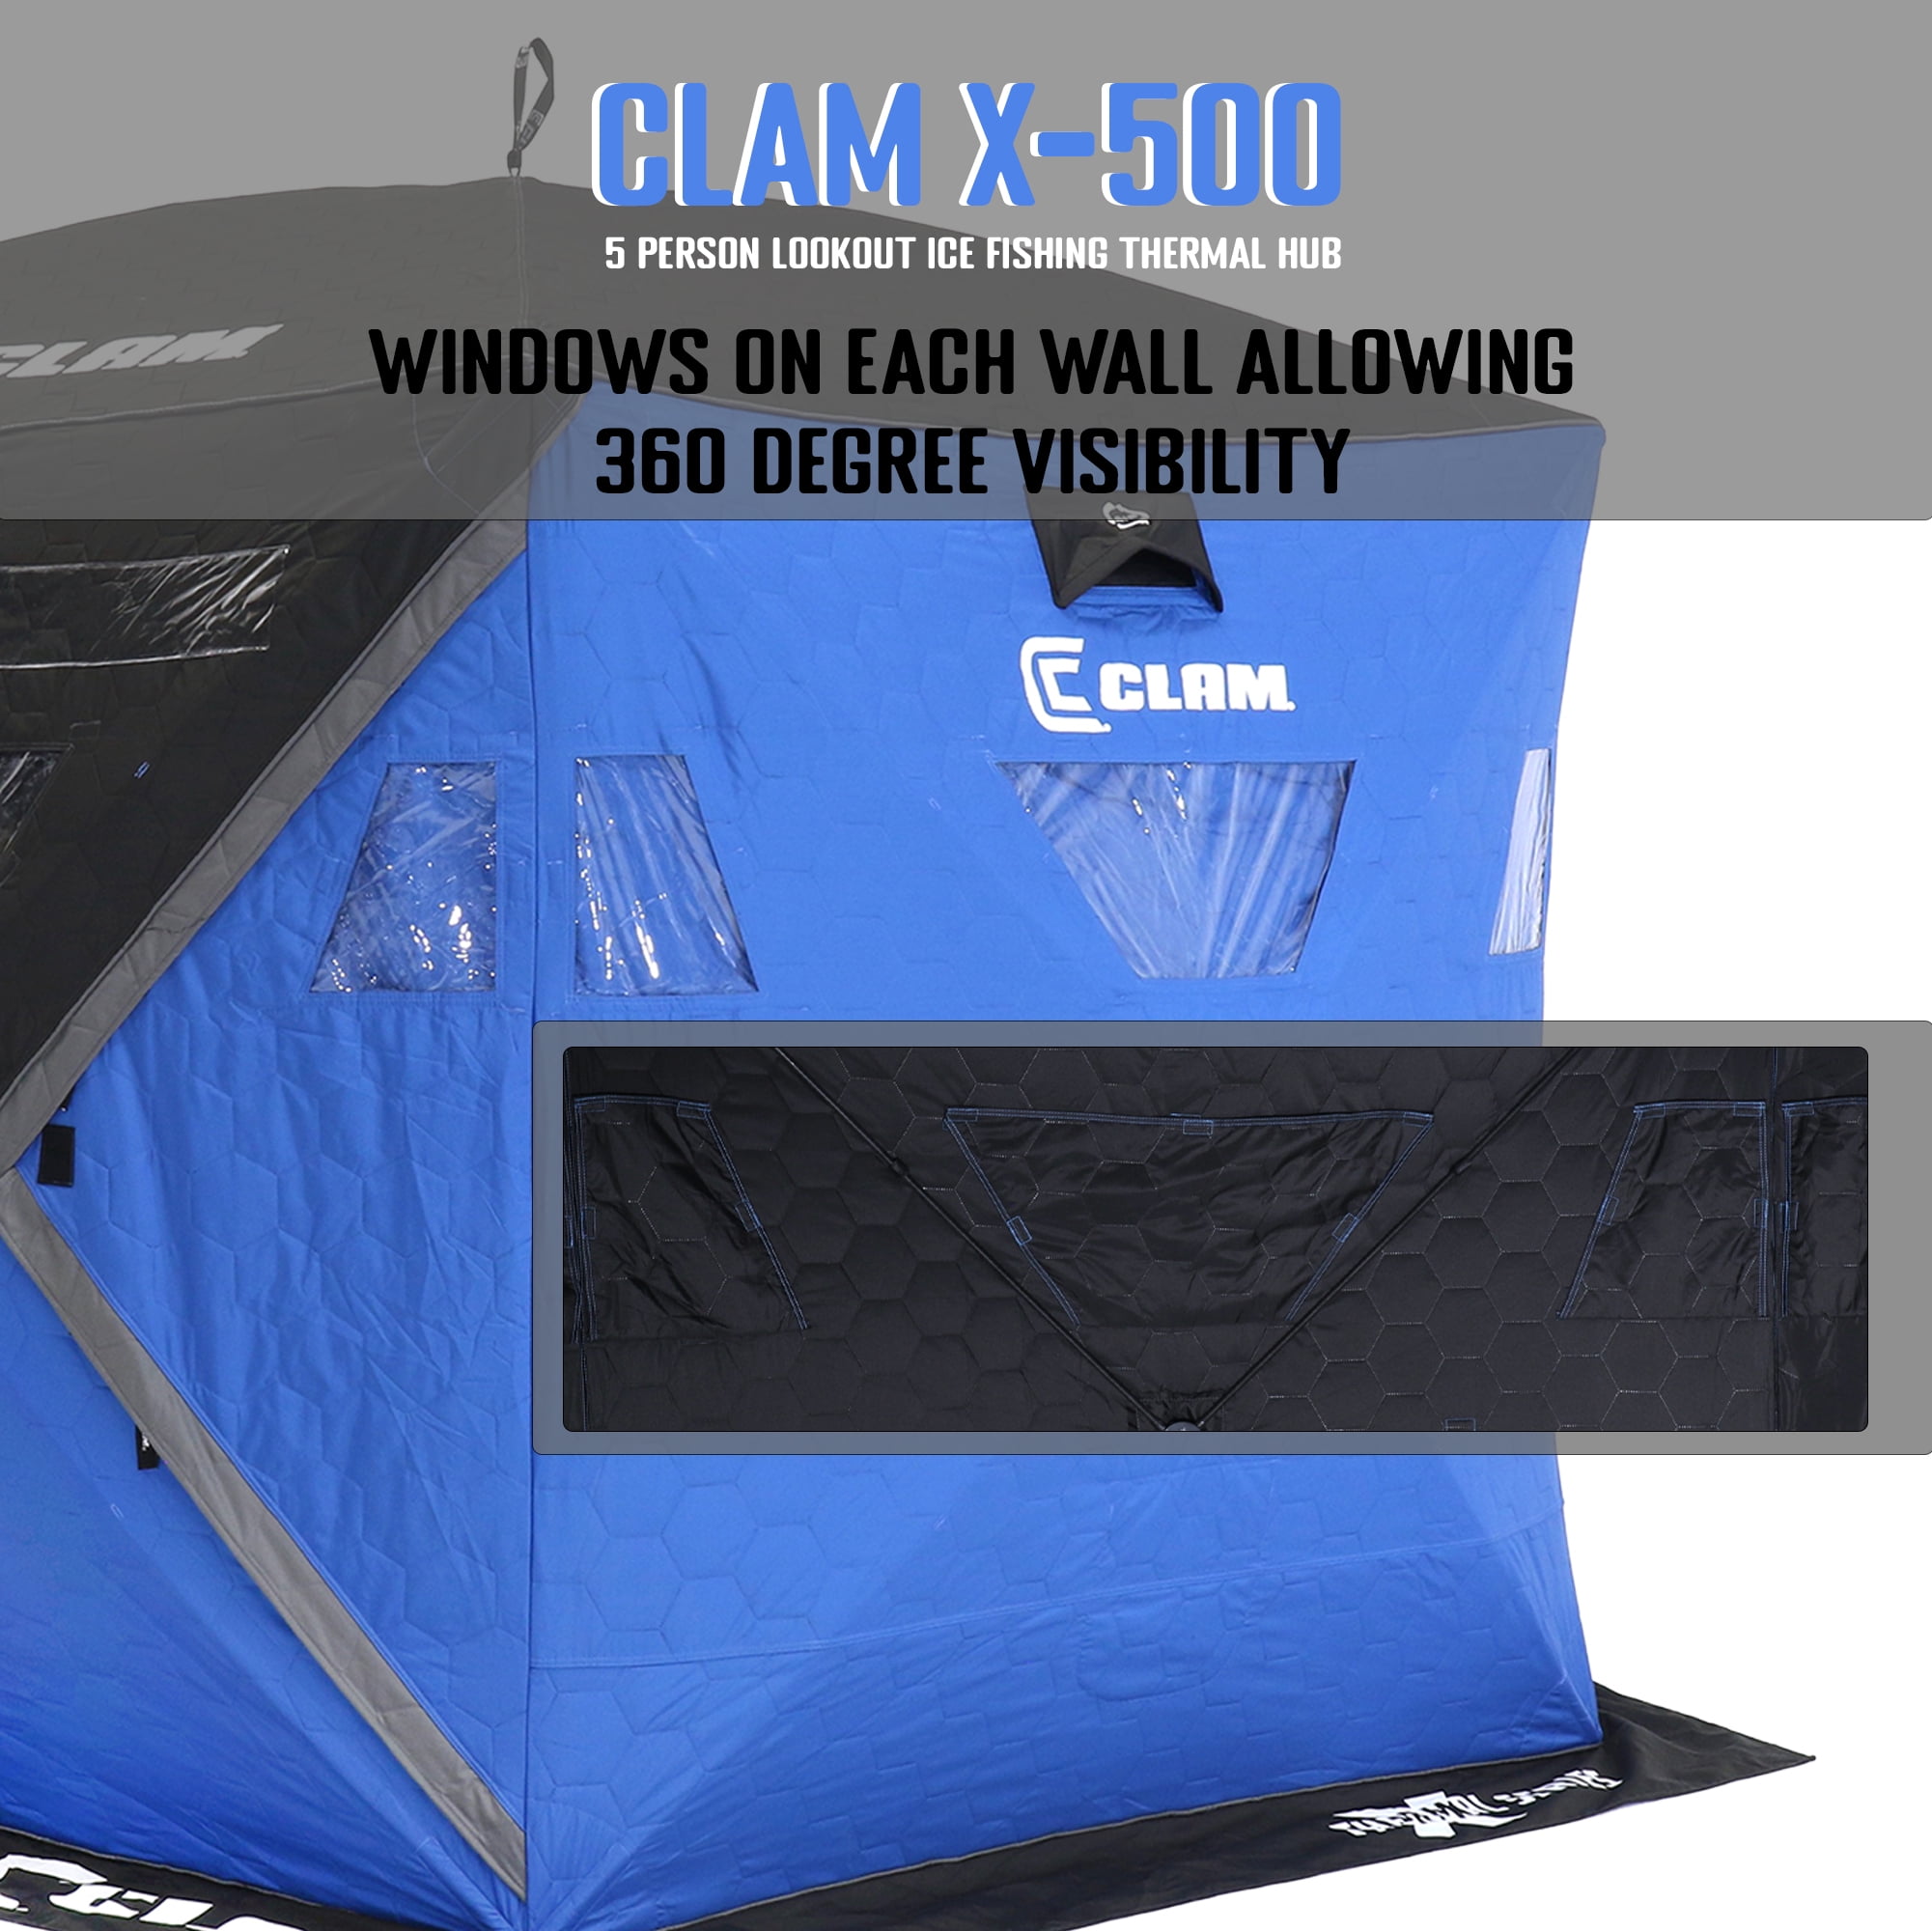 CLAM X-500 Portable 5 Person 9' Lookout Ice Fishing Thermal Hub